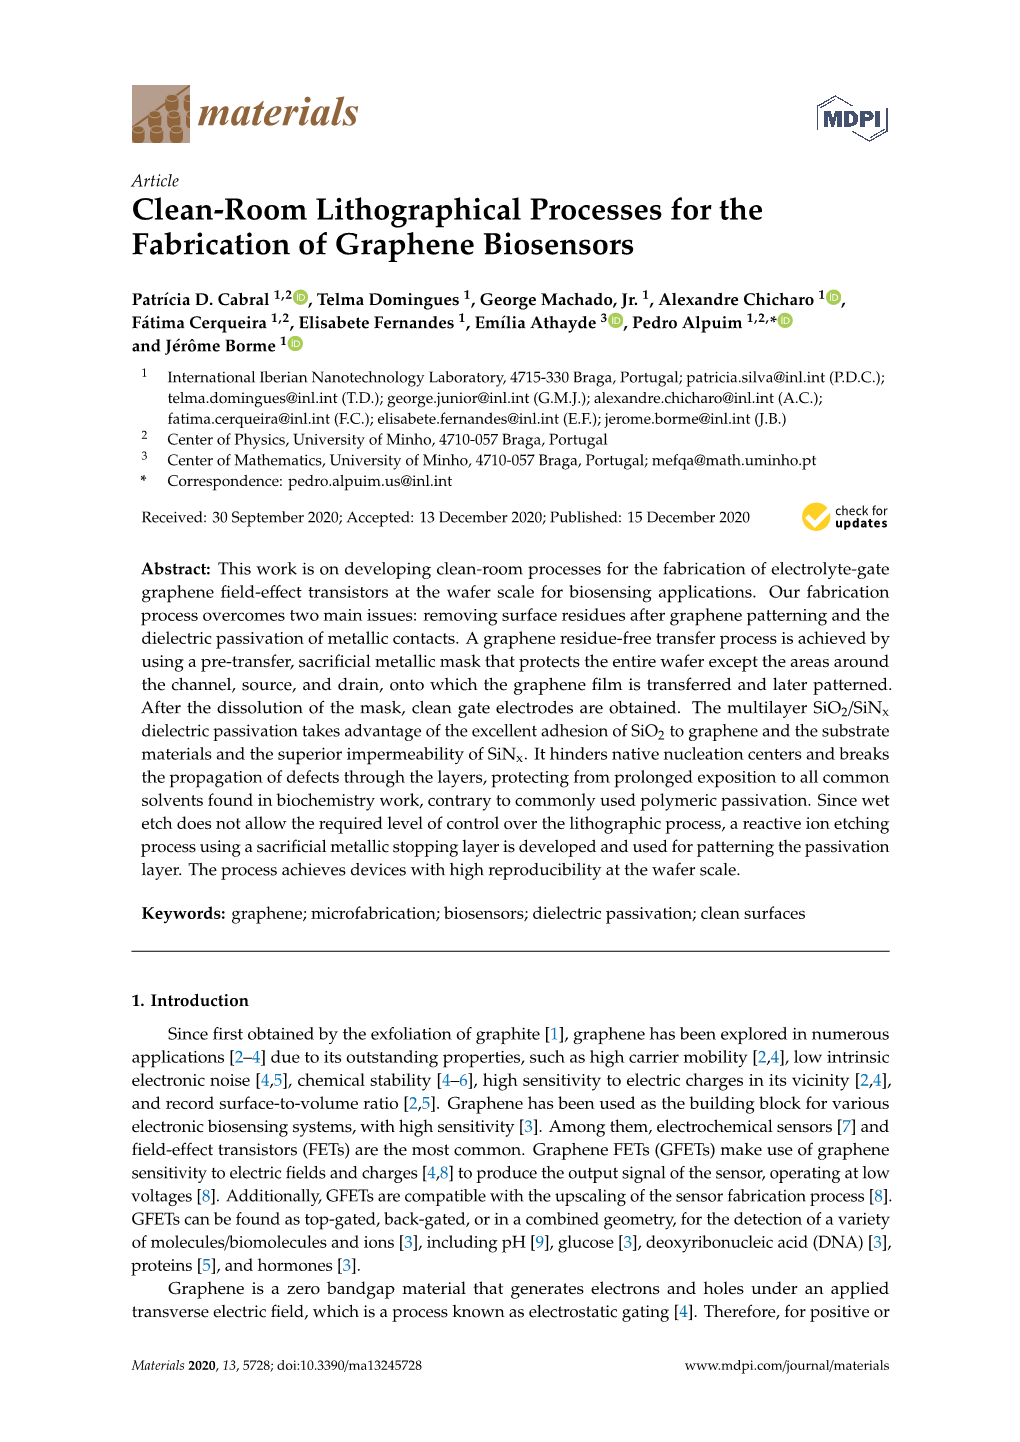 Clean-Room Lithographical Processes for the Fabrication of Graphene Biosensors